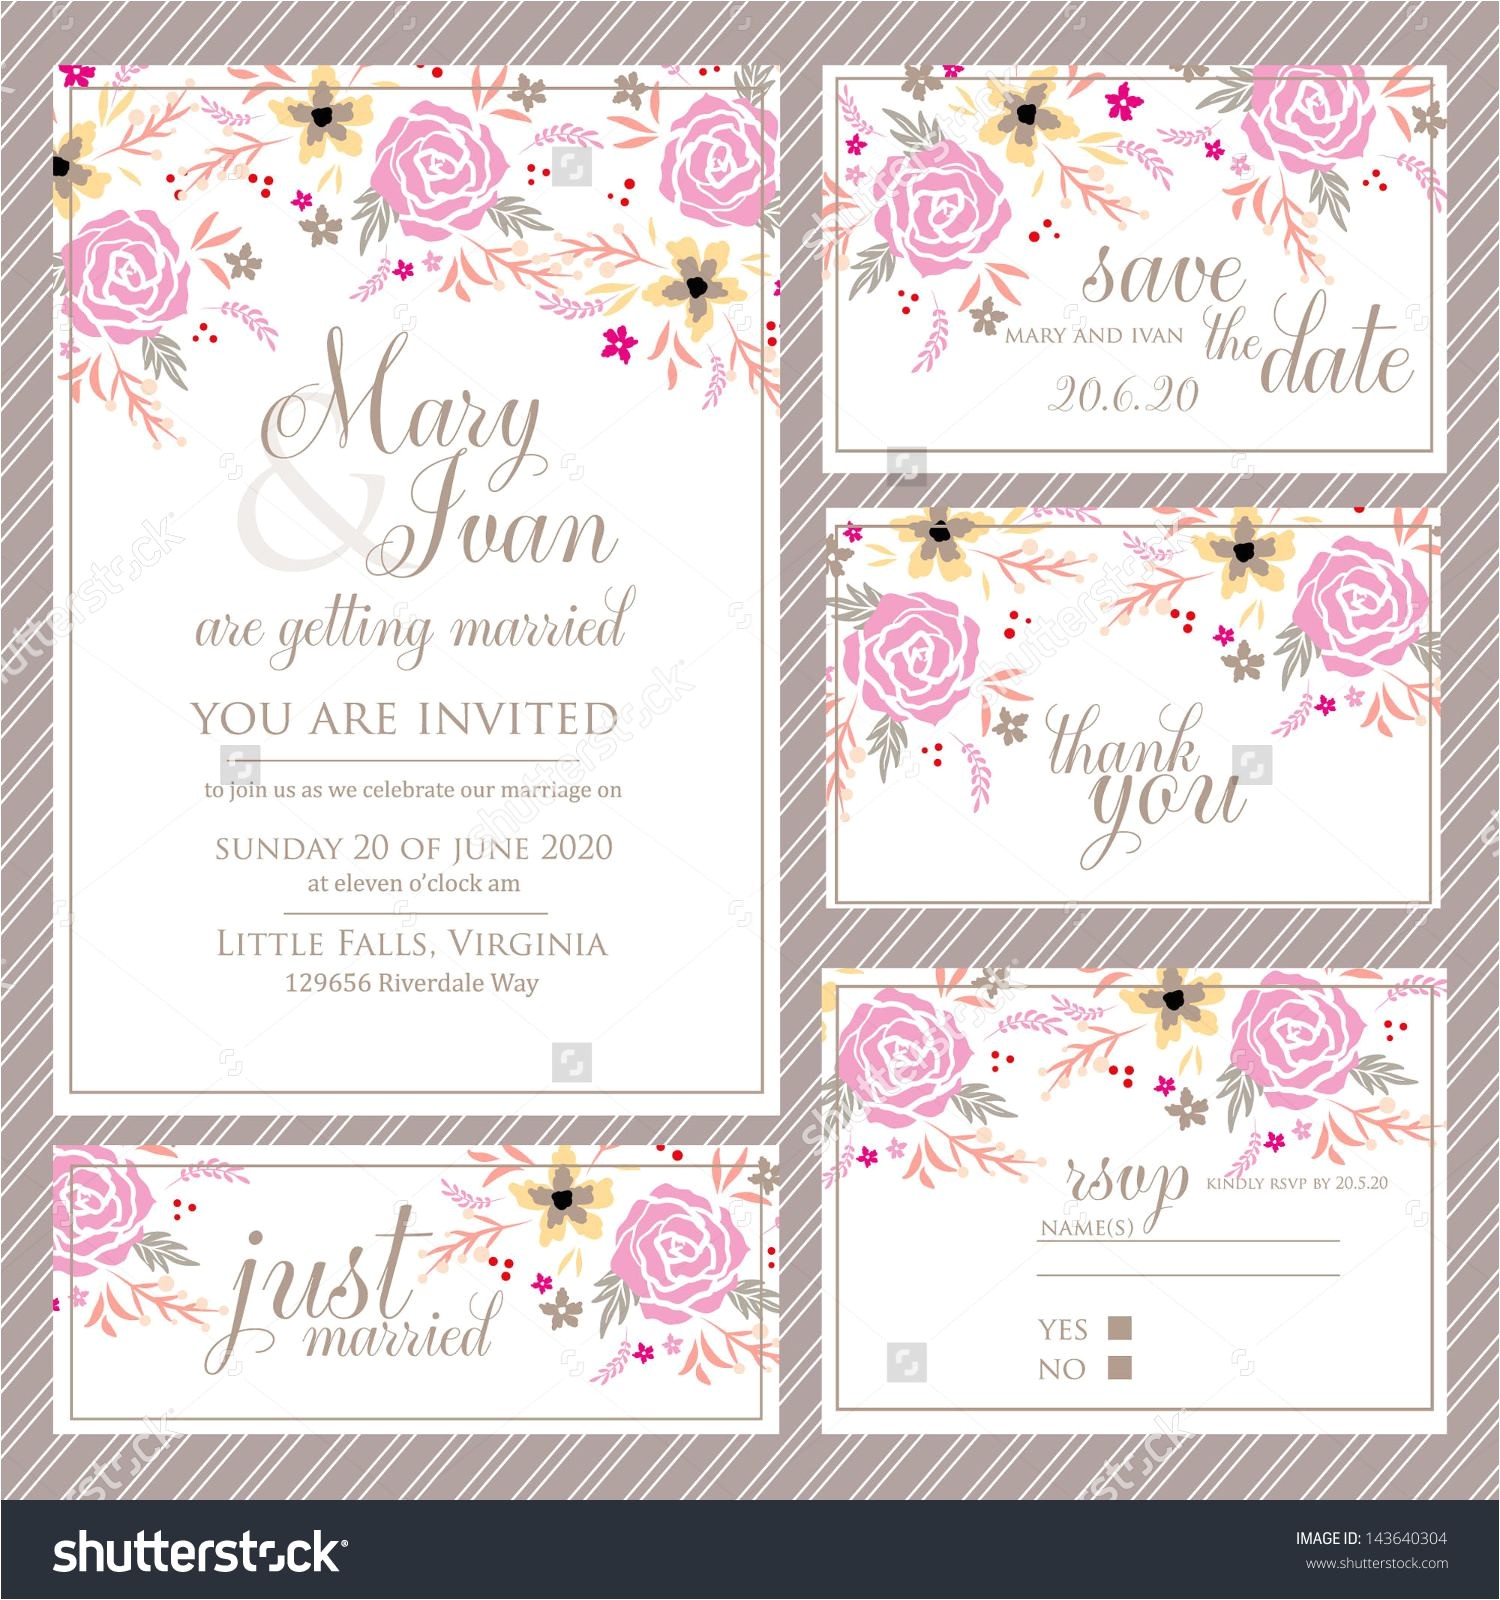 wedding invitations with rsvp cards package